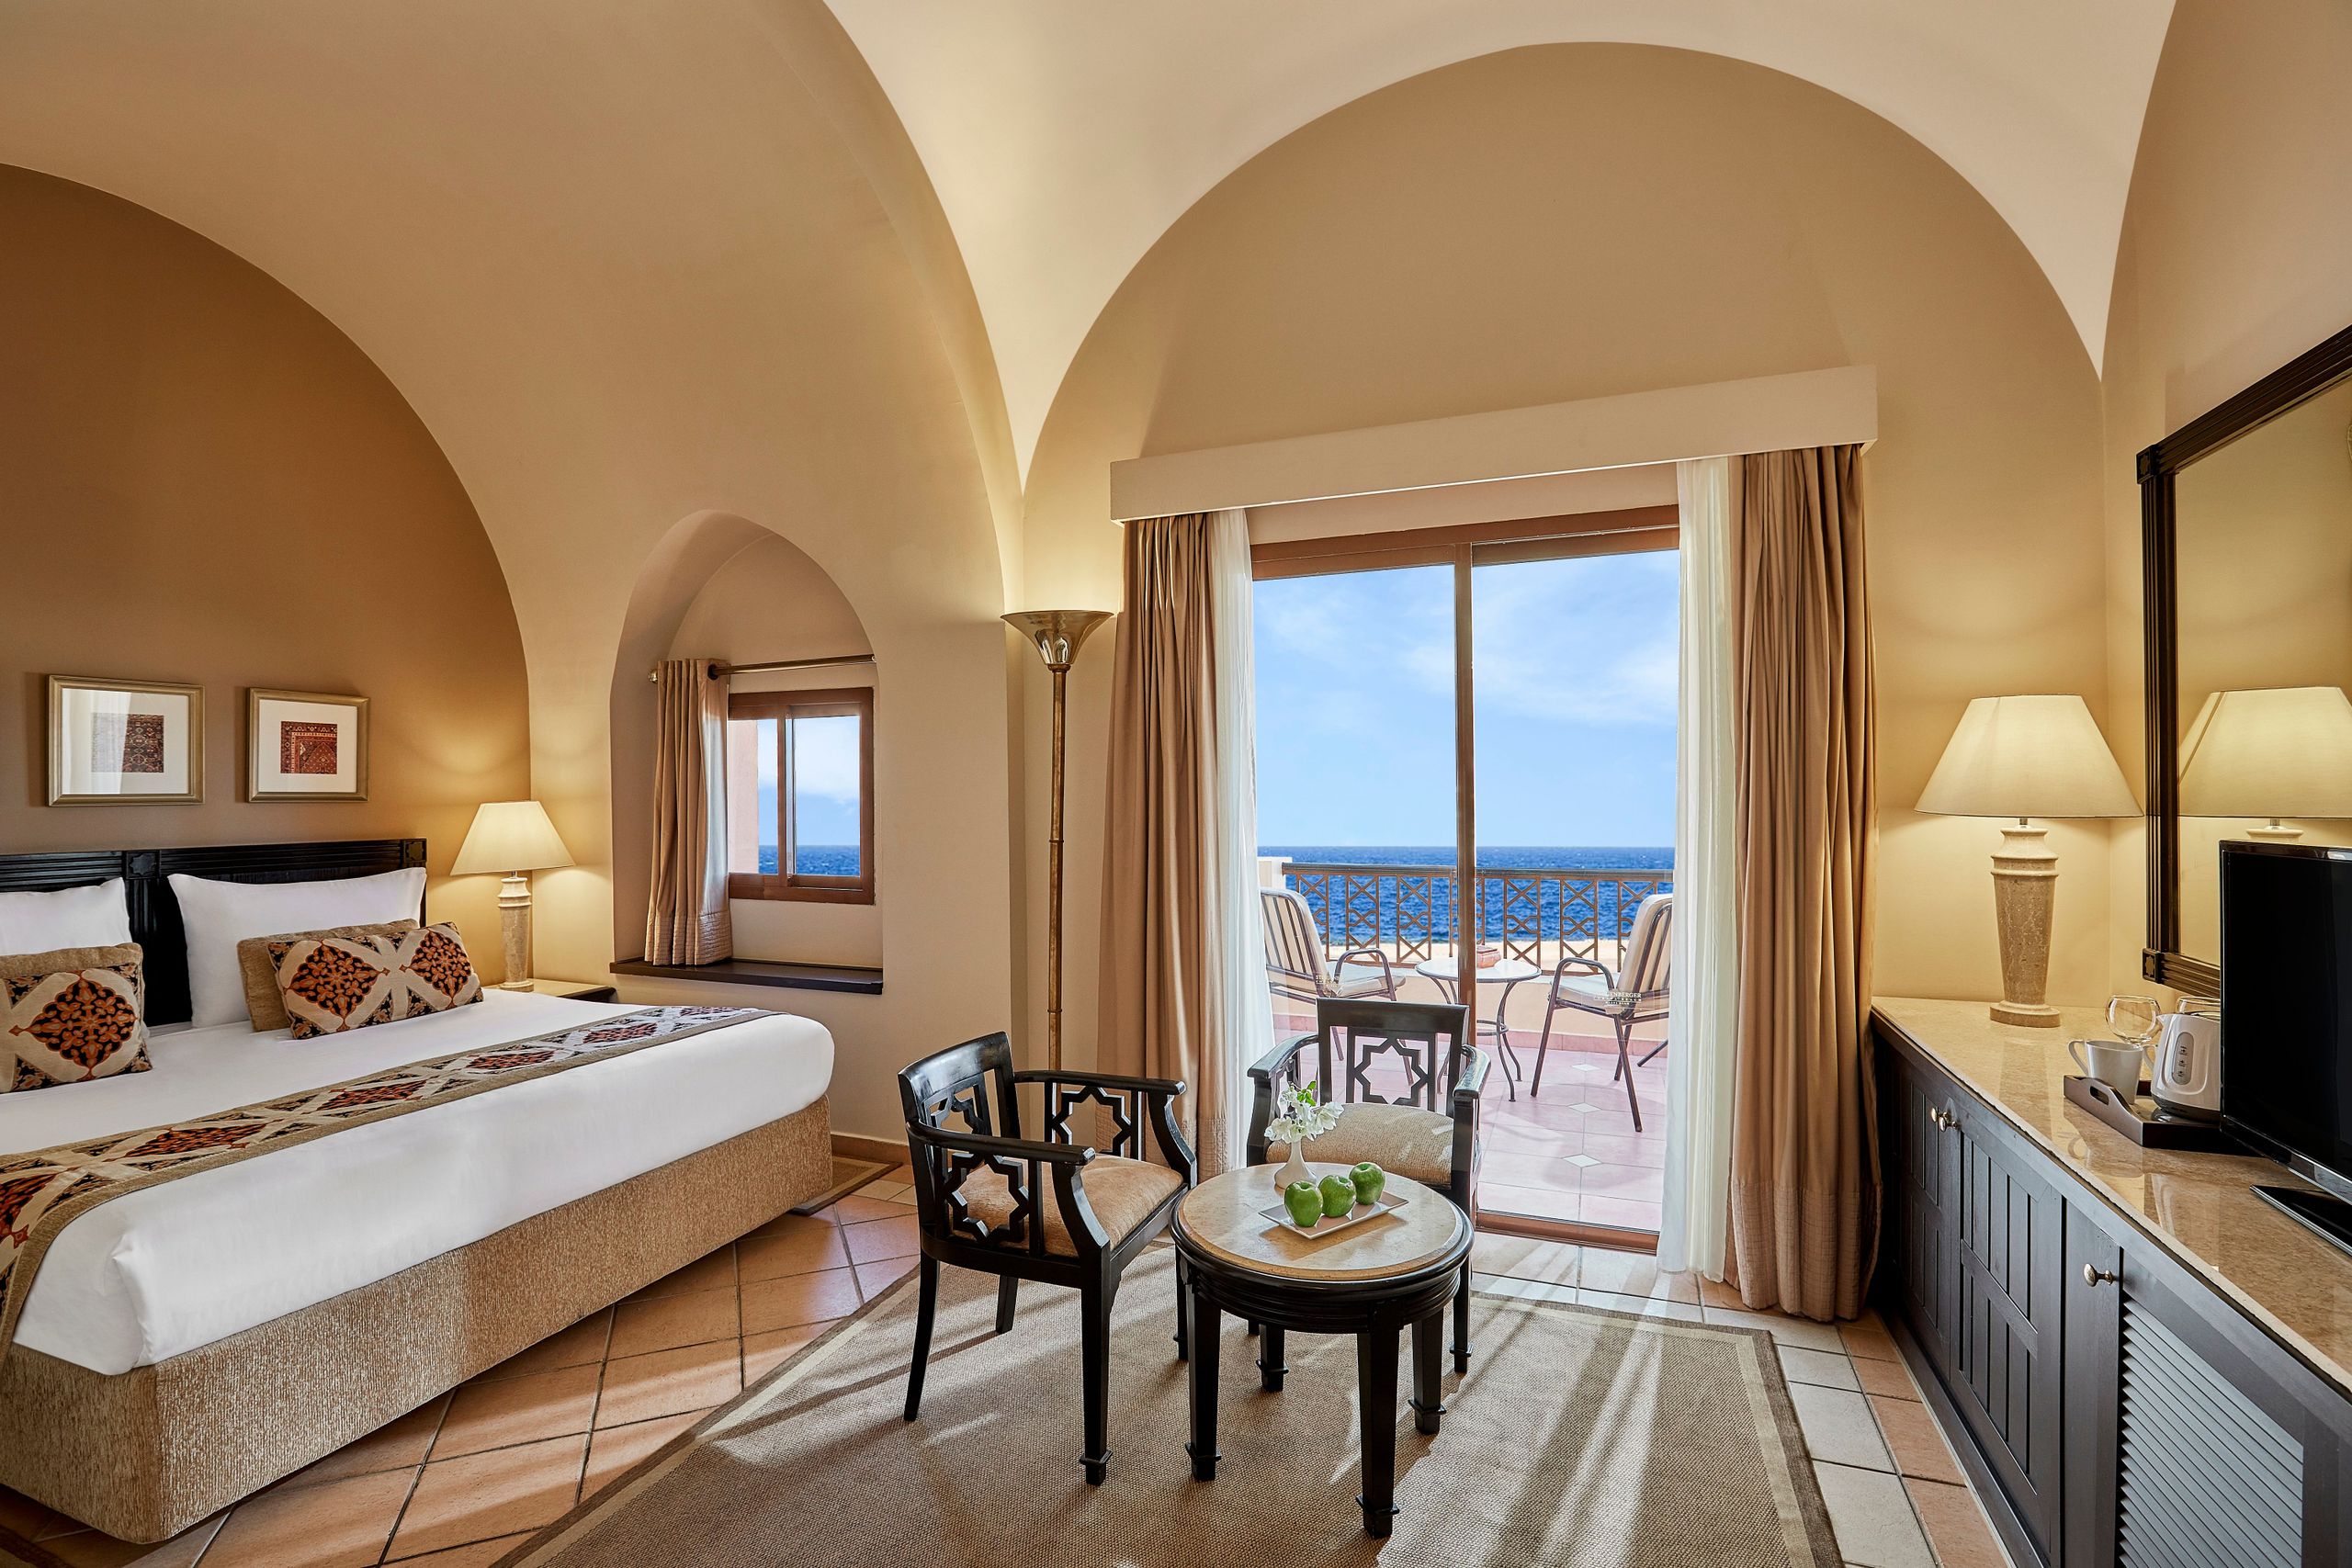 Steigenberger Coraya Beach Hotel, Marsa Alam - Superior room sea-view with Queen-size bed